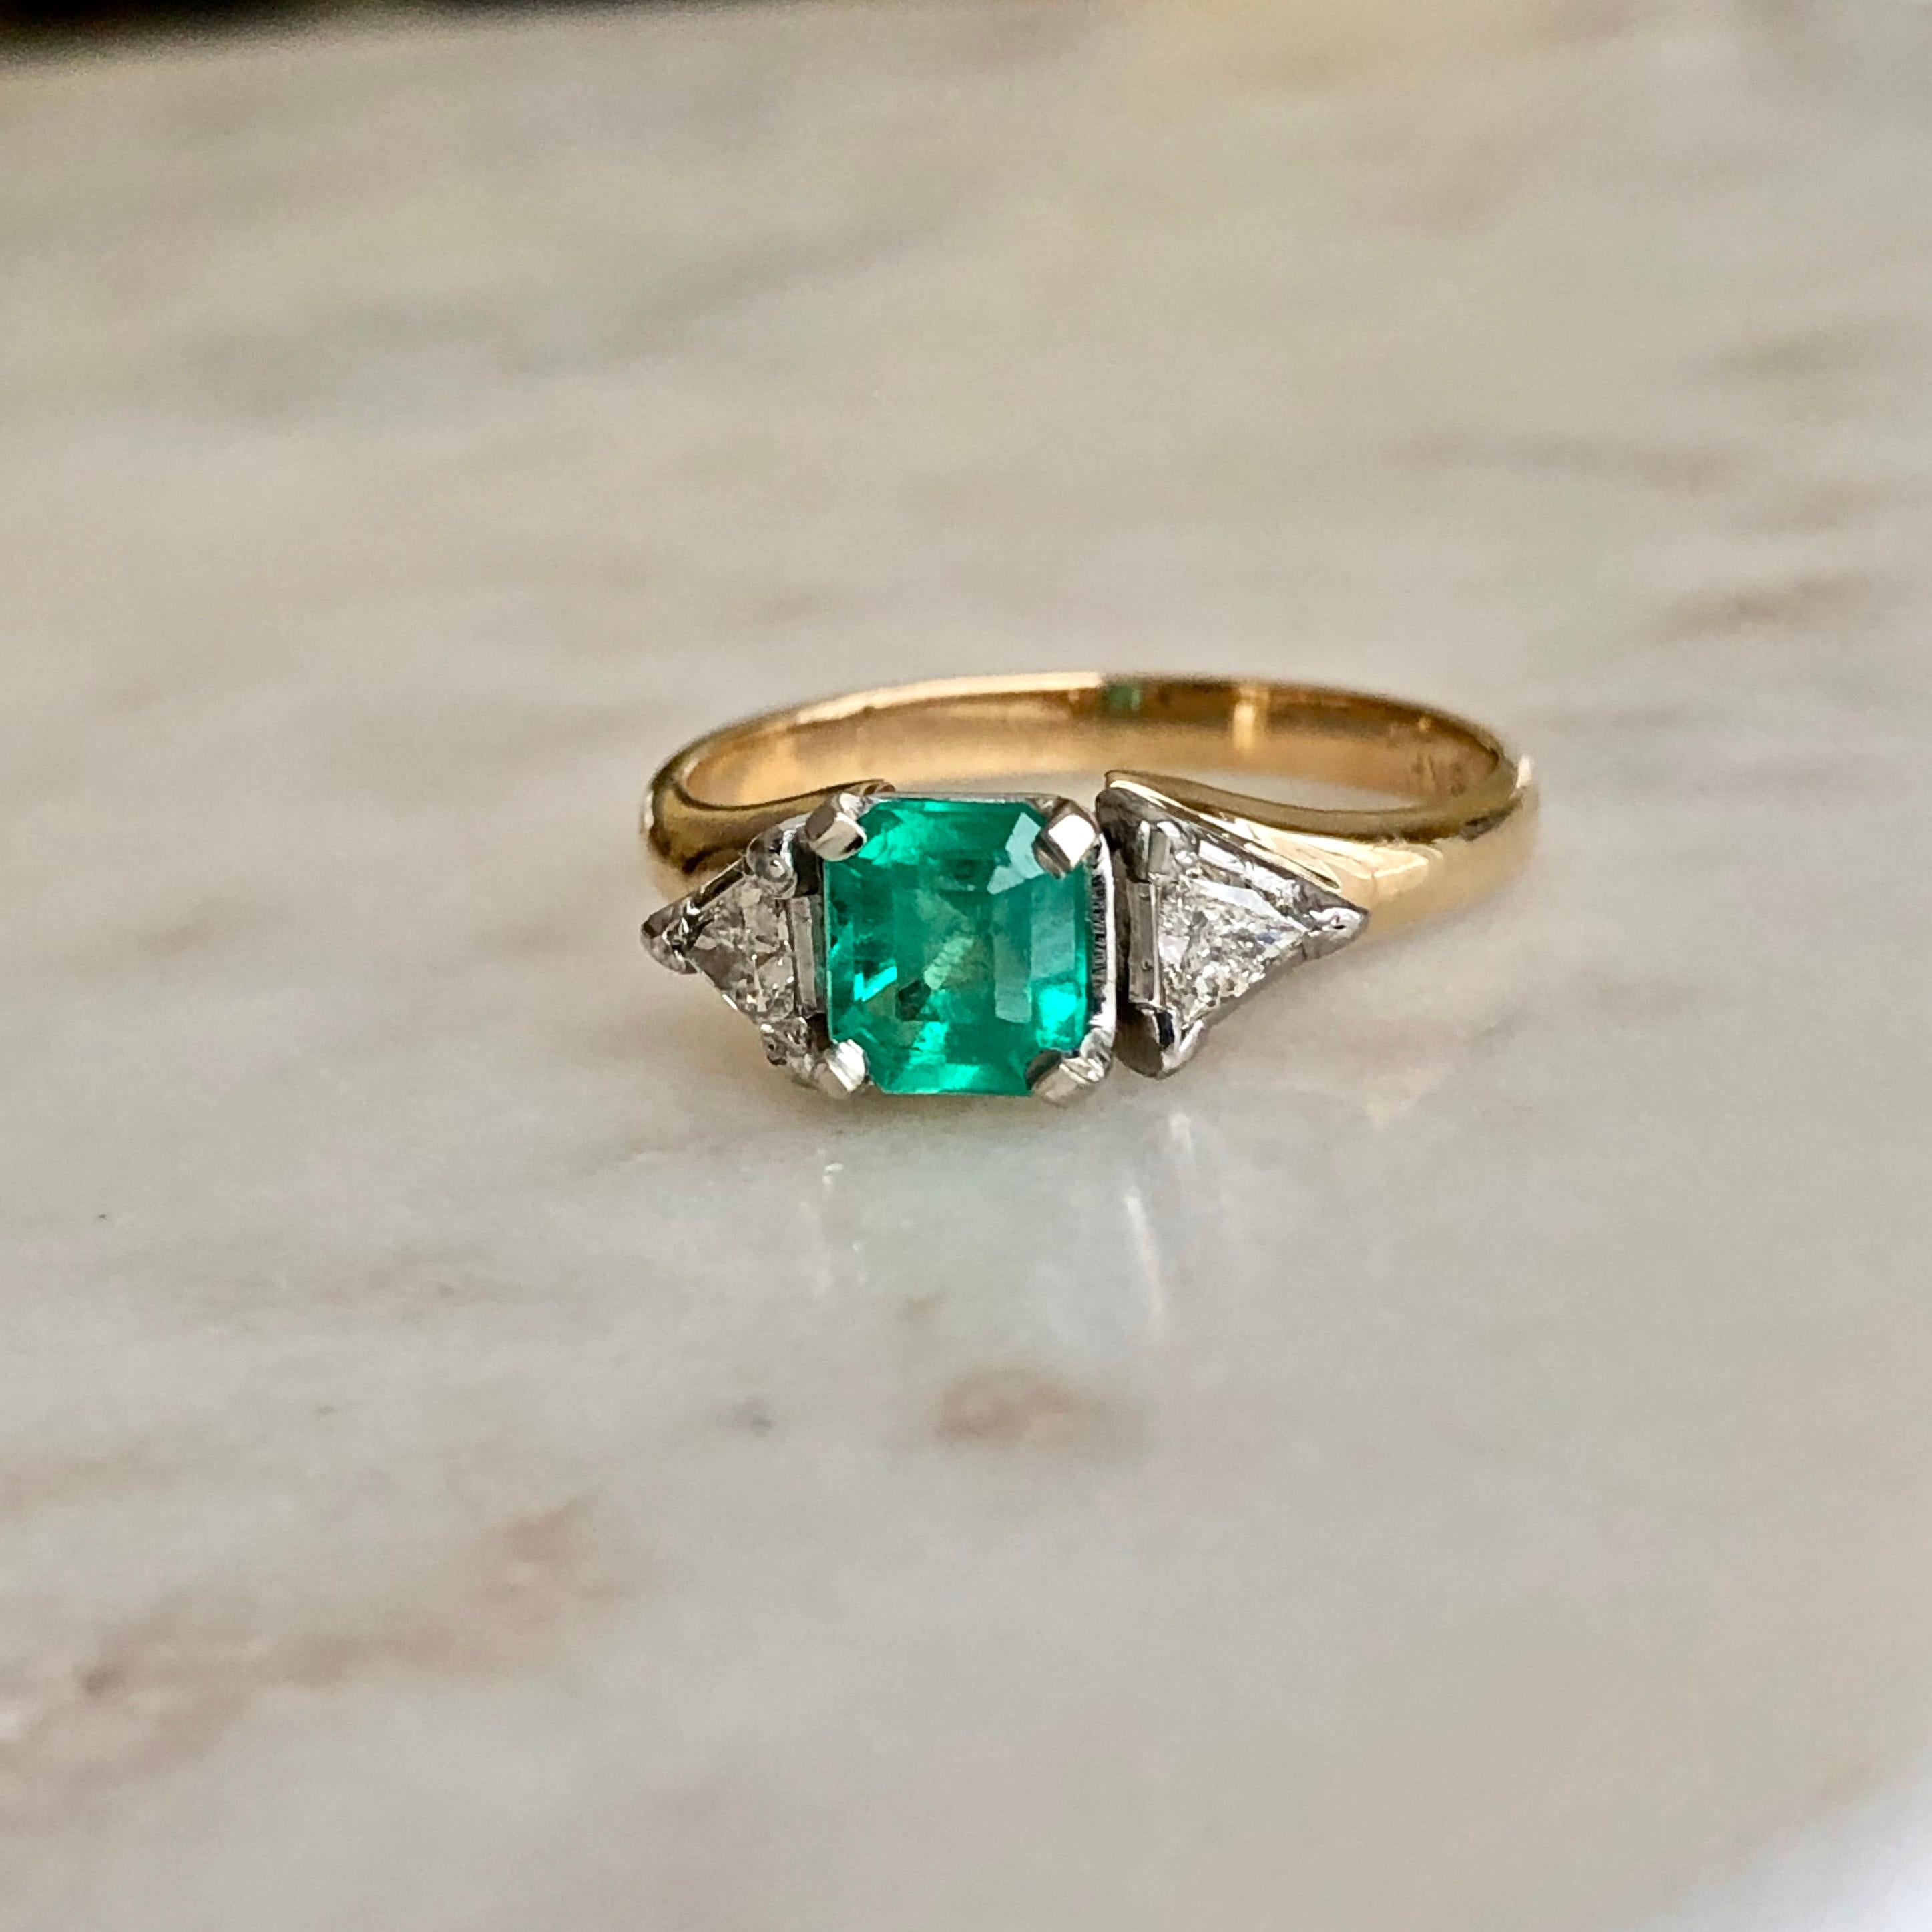 Classic engagement ring that is centered with an natural square-cut emerald from Colombia with 'nice medium green’ color, weighing 0.78ct and two genuine triangular brilliant-cut diamonds weighing 0.26ct H-VS-SI1. Total ring weight 4.6g made of